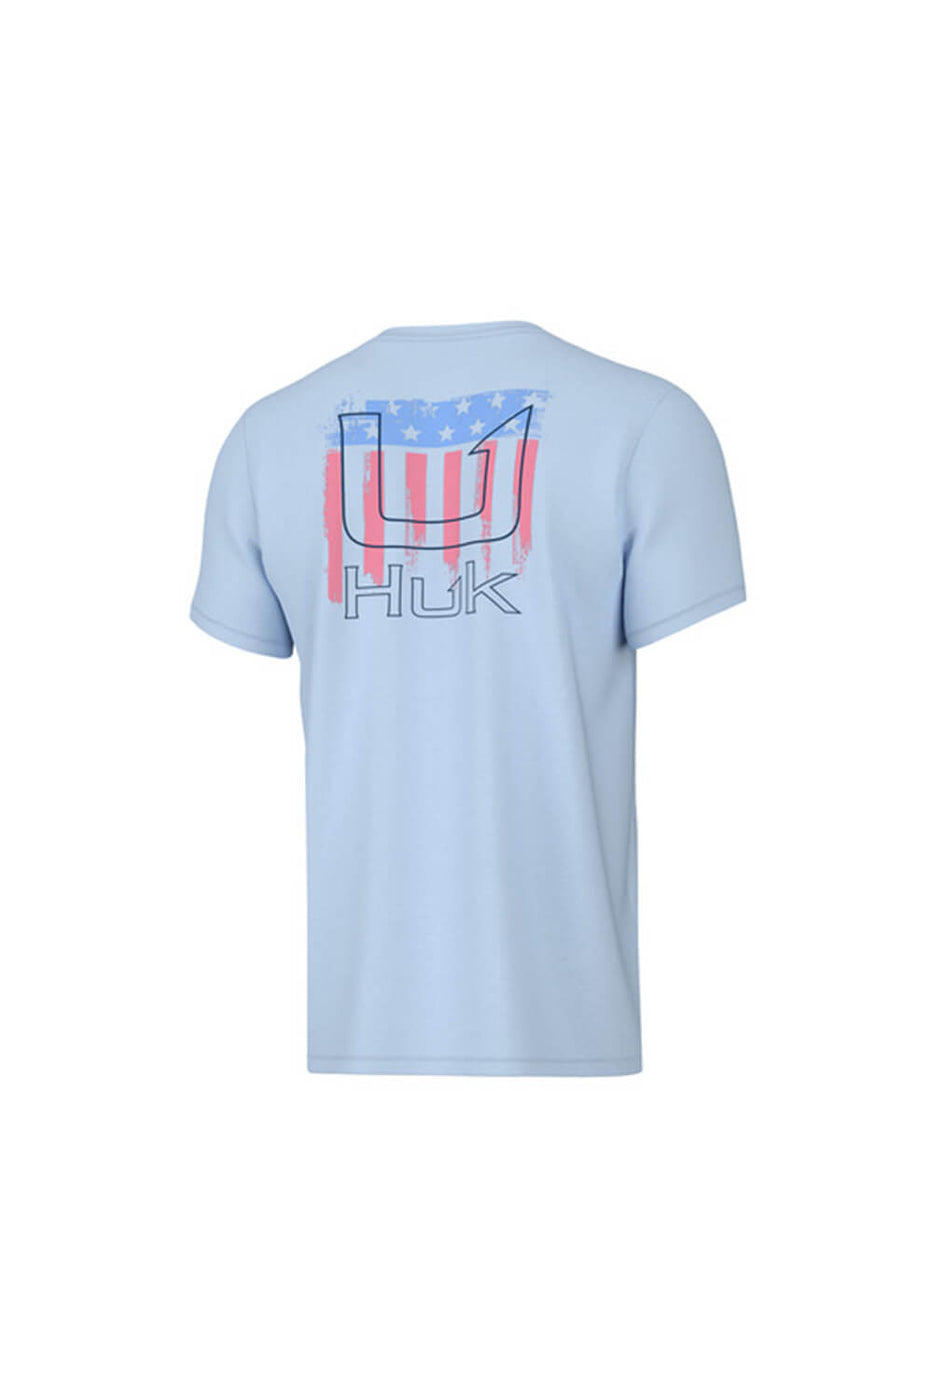 Huk Fishing Youth Salute T-Shirt for Boys in Blue